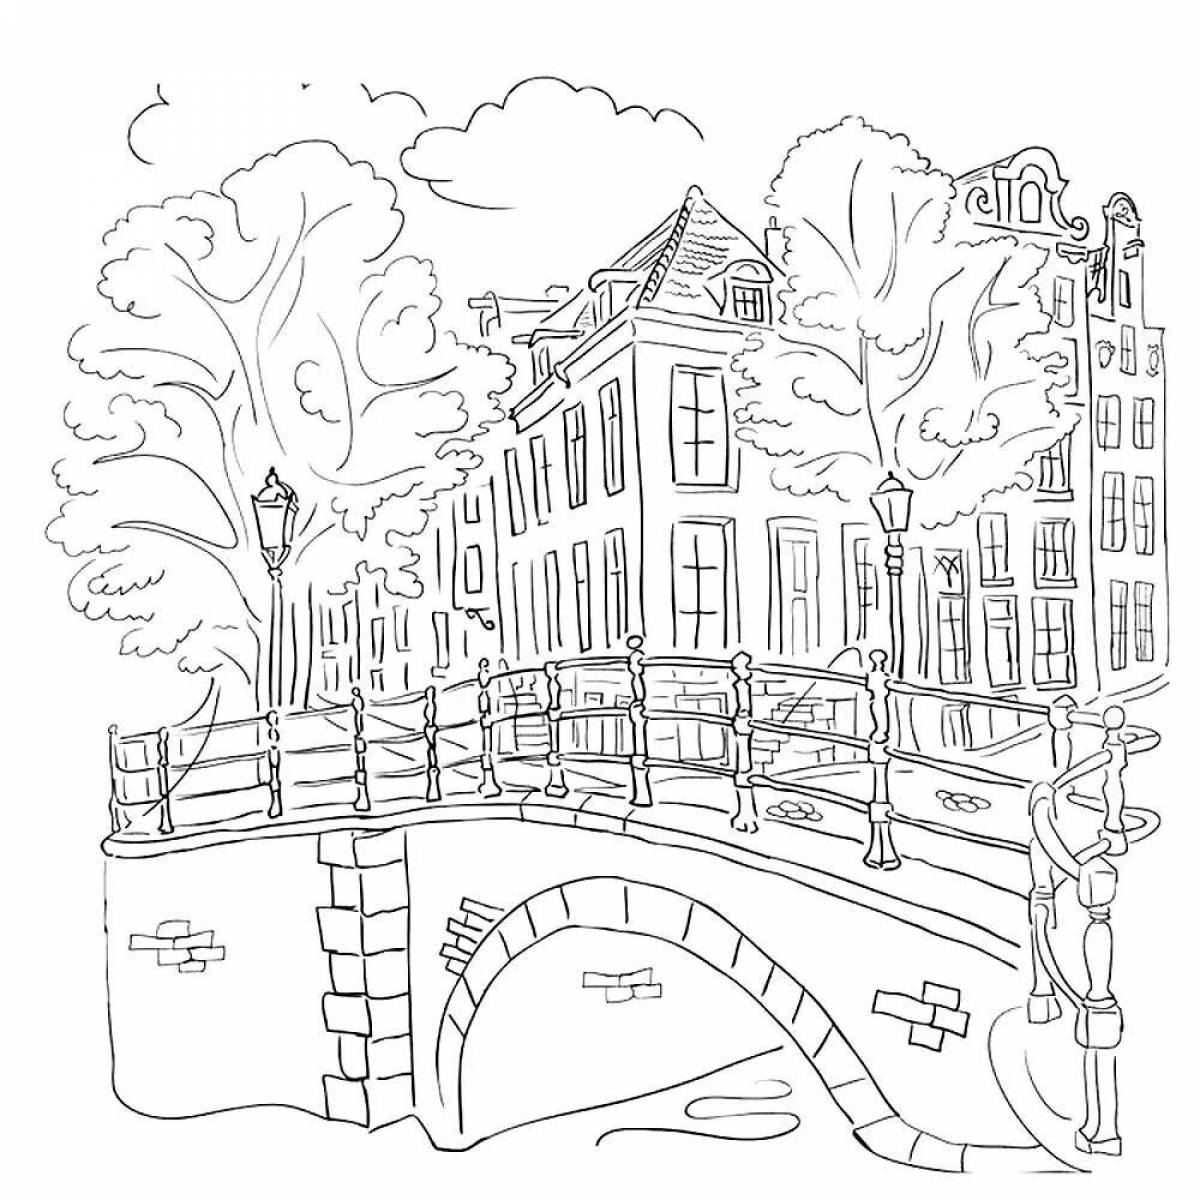 Coloring page hypnotic city of voronezh